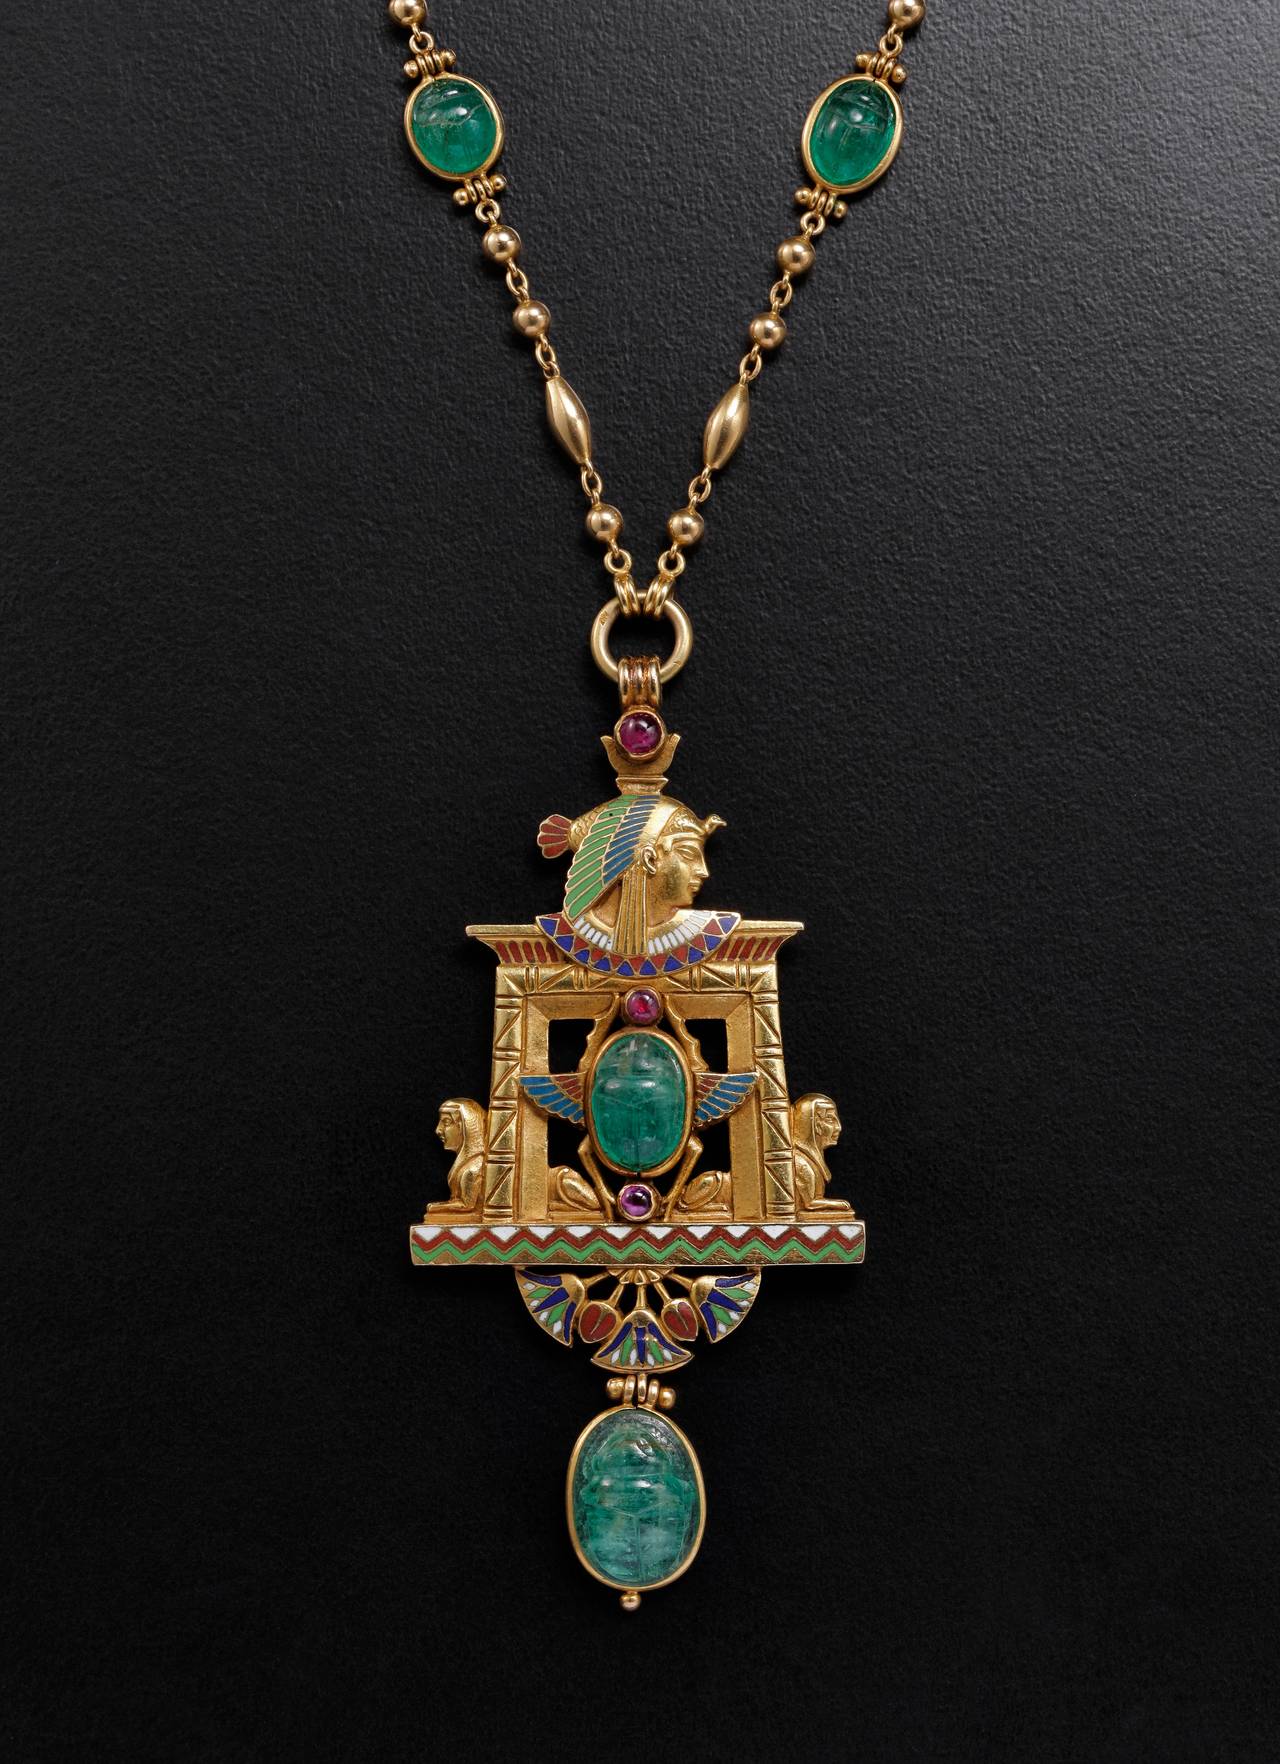 JULES WIESE (1818-1890)

Pendant « Egypt »

Yellow gold, enamel, emeralds, pearls

Paris, circa 1875

UNIQUE PIECE

Inspiration of excavations in Egypt by Mariette Bey 
and the construction of the Suez Canal

The goldsmith and jeweller,